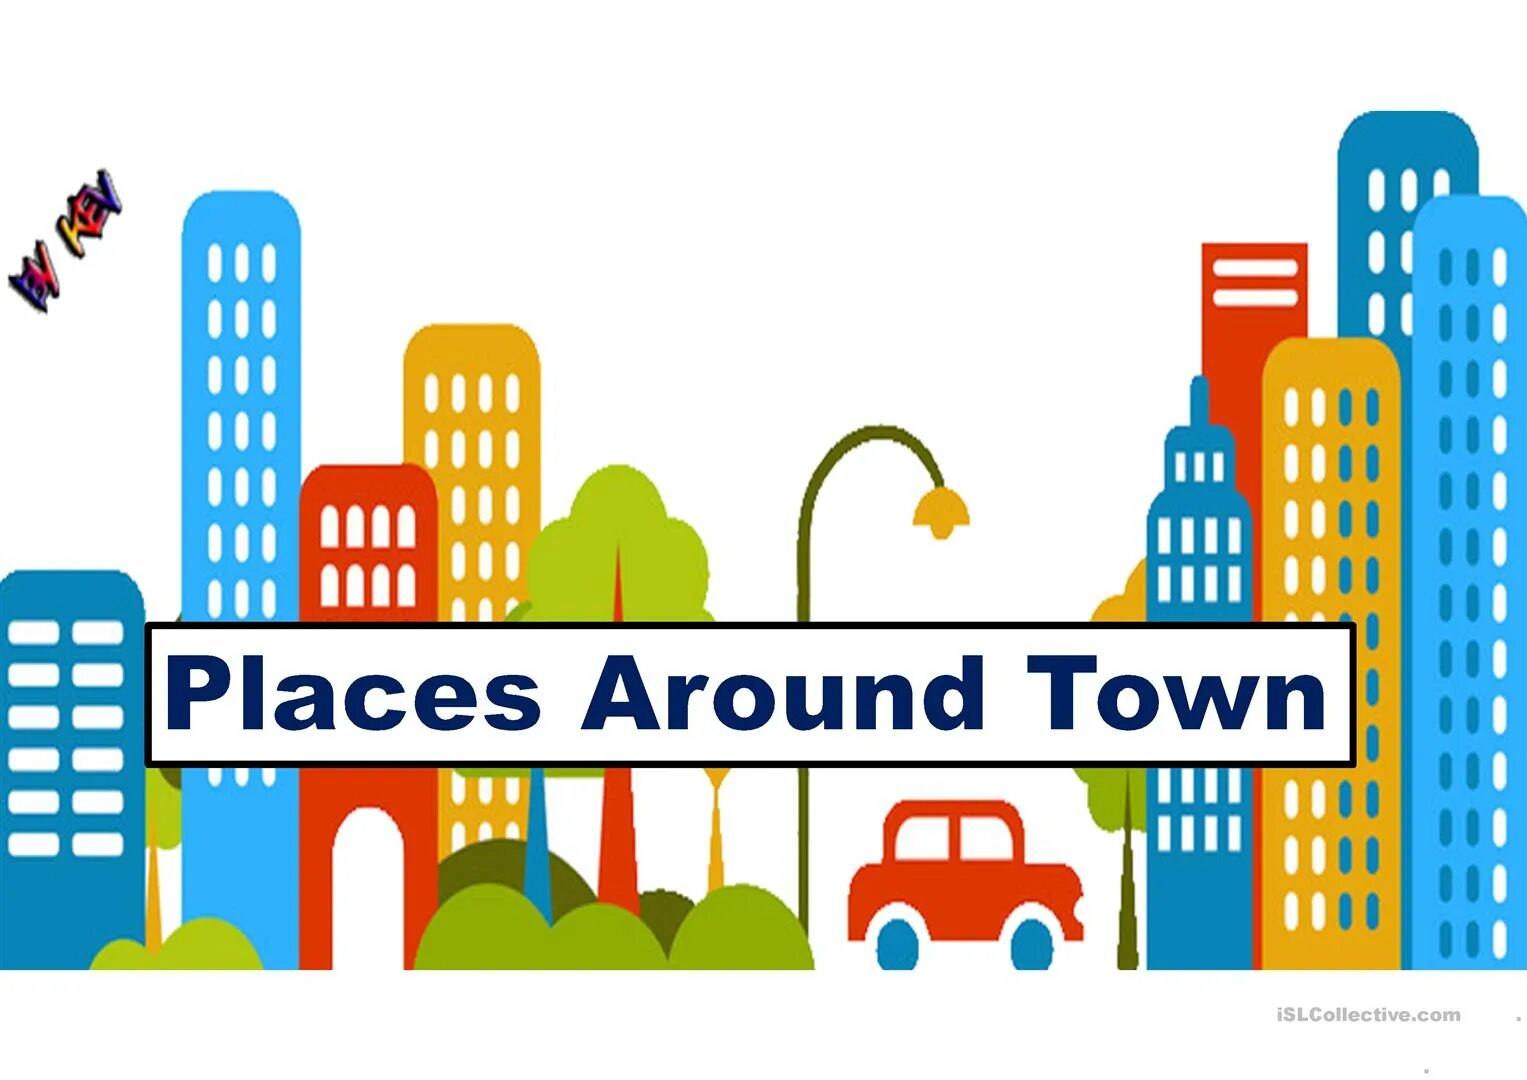 Places around Town. Places in Town для детей. Around Town 5 класс. Places around City. Going around the city